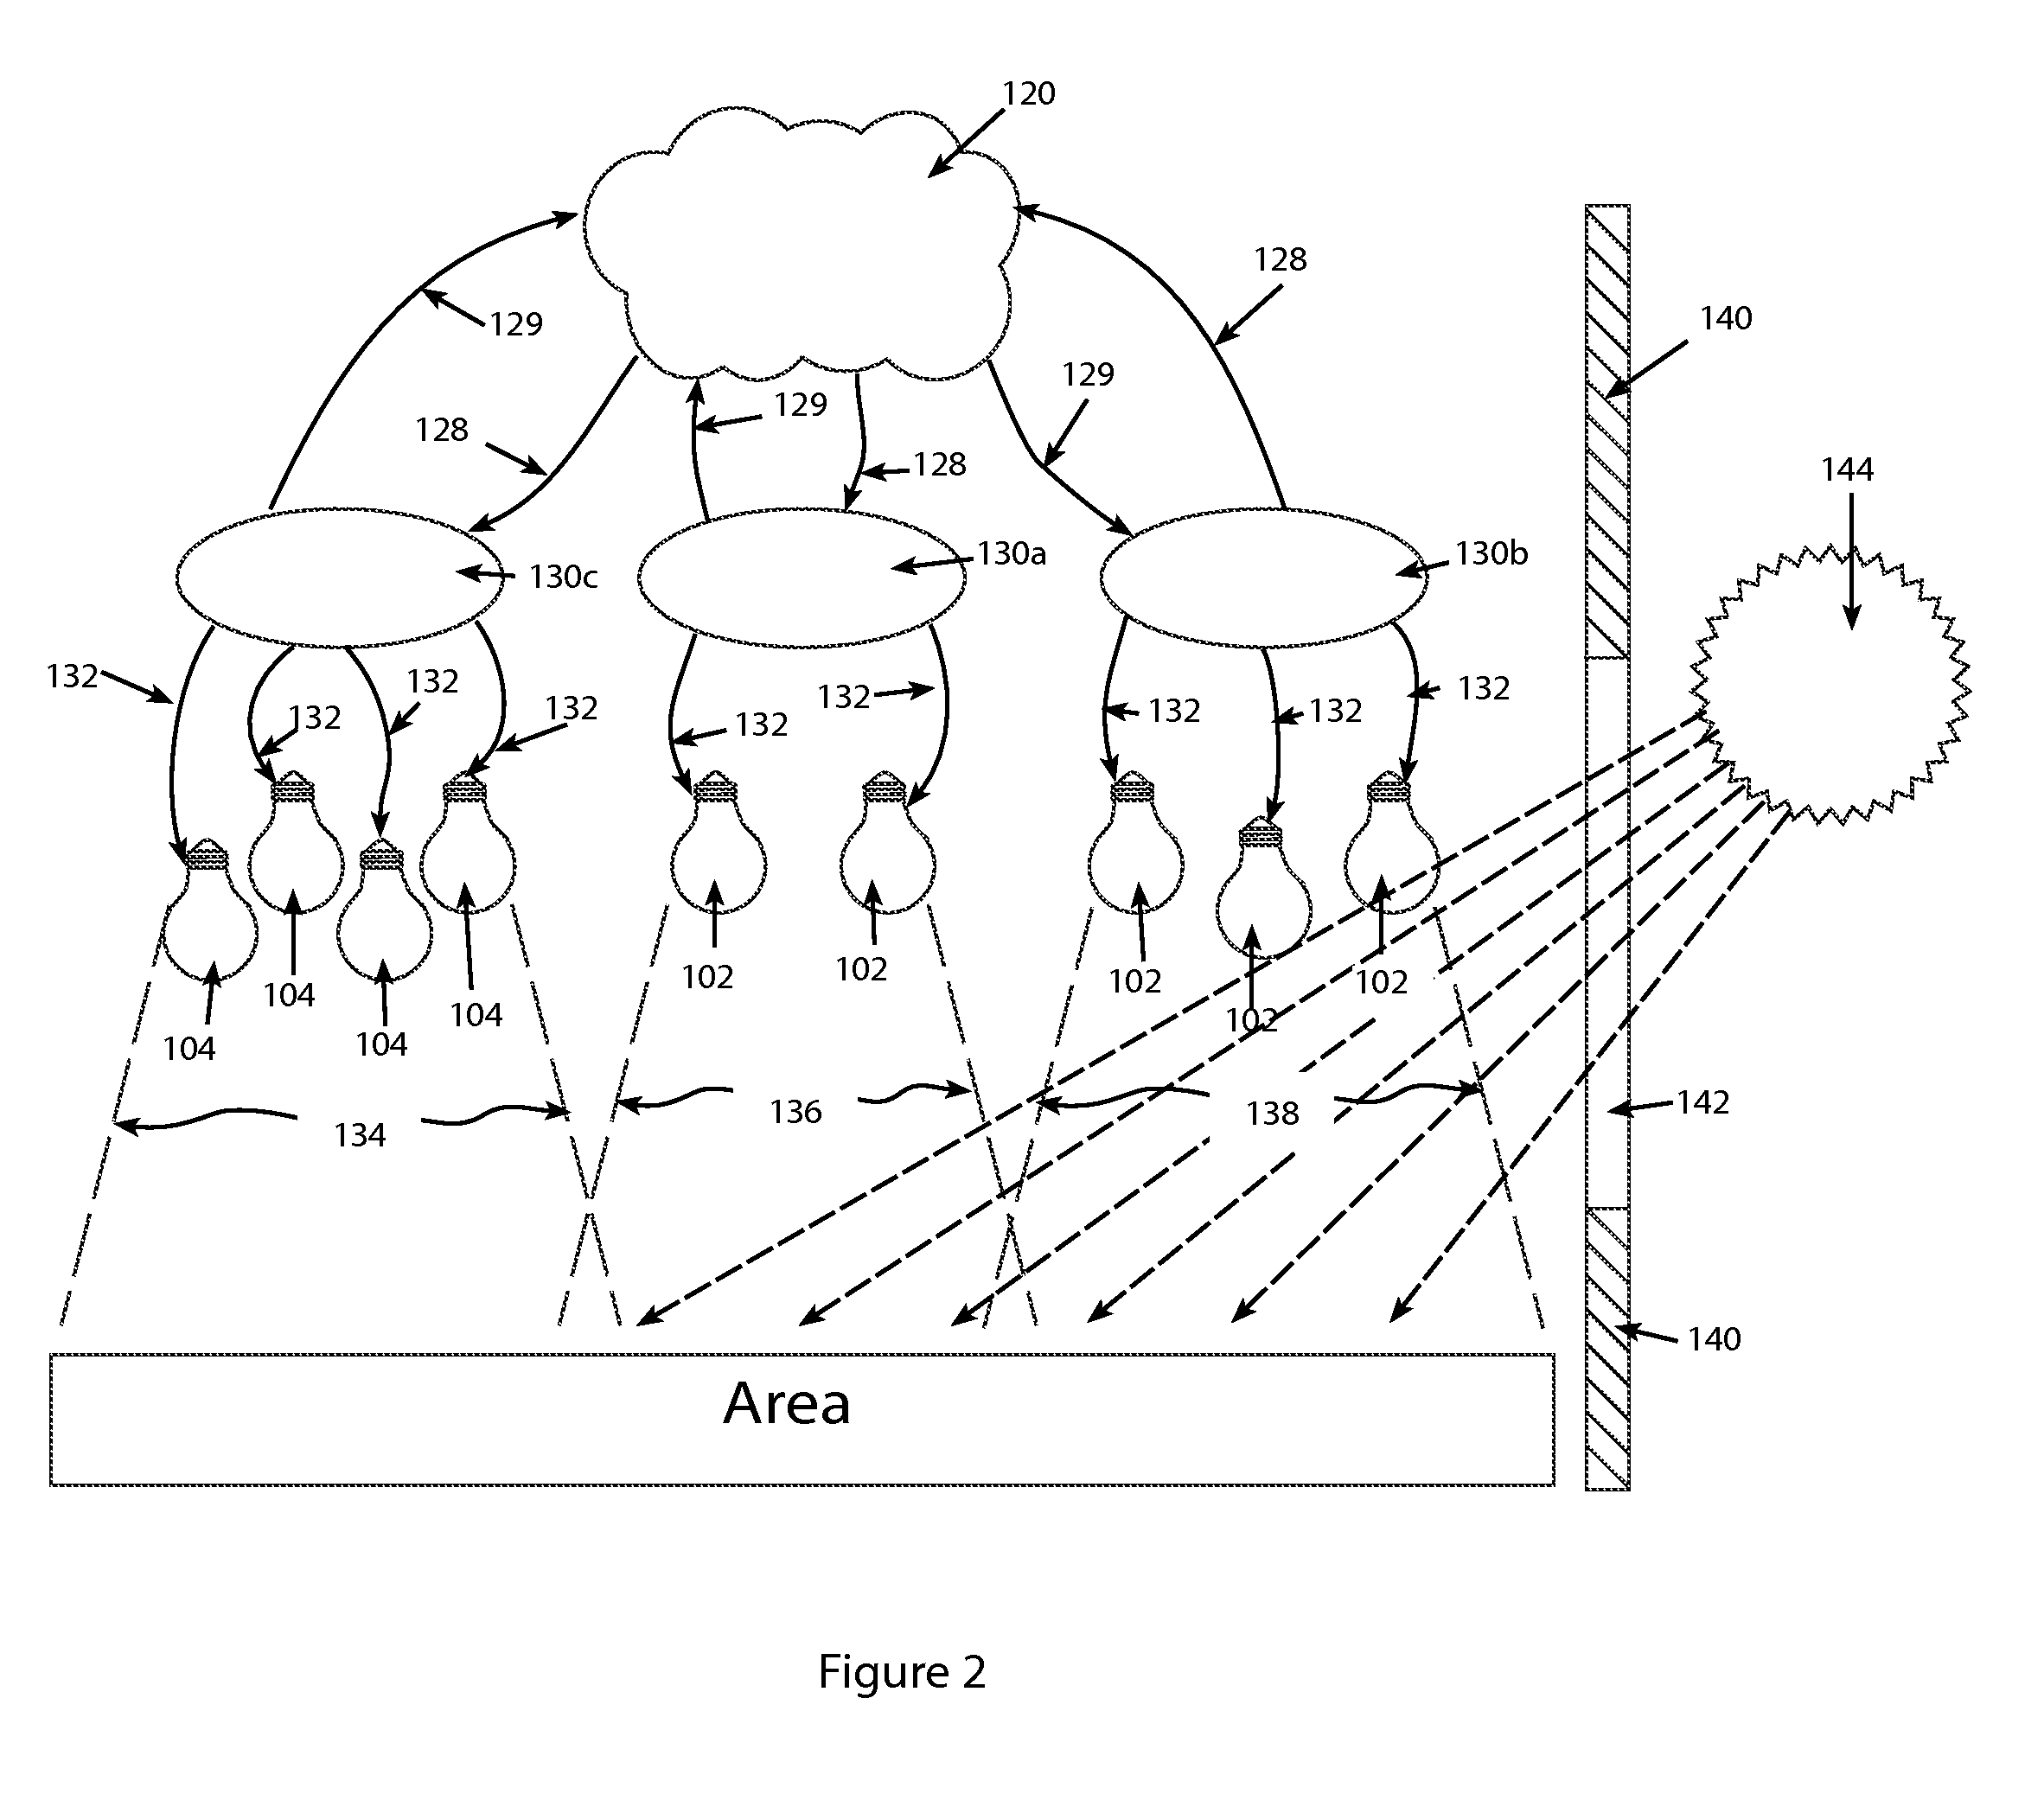 Illumination control system for motion and daylight in large structures